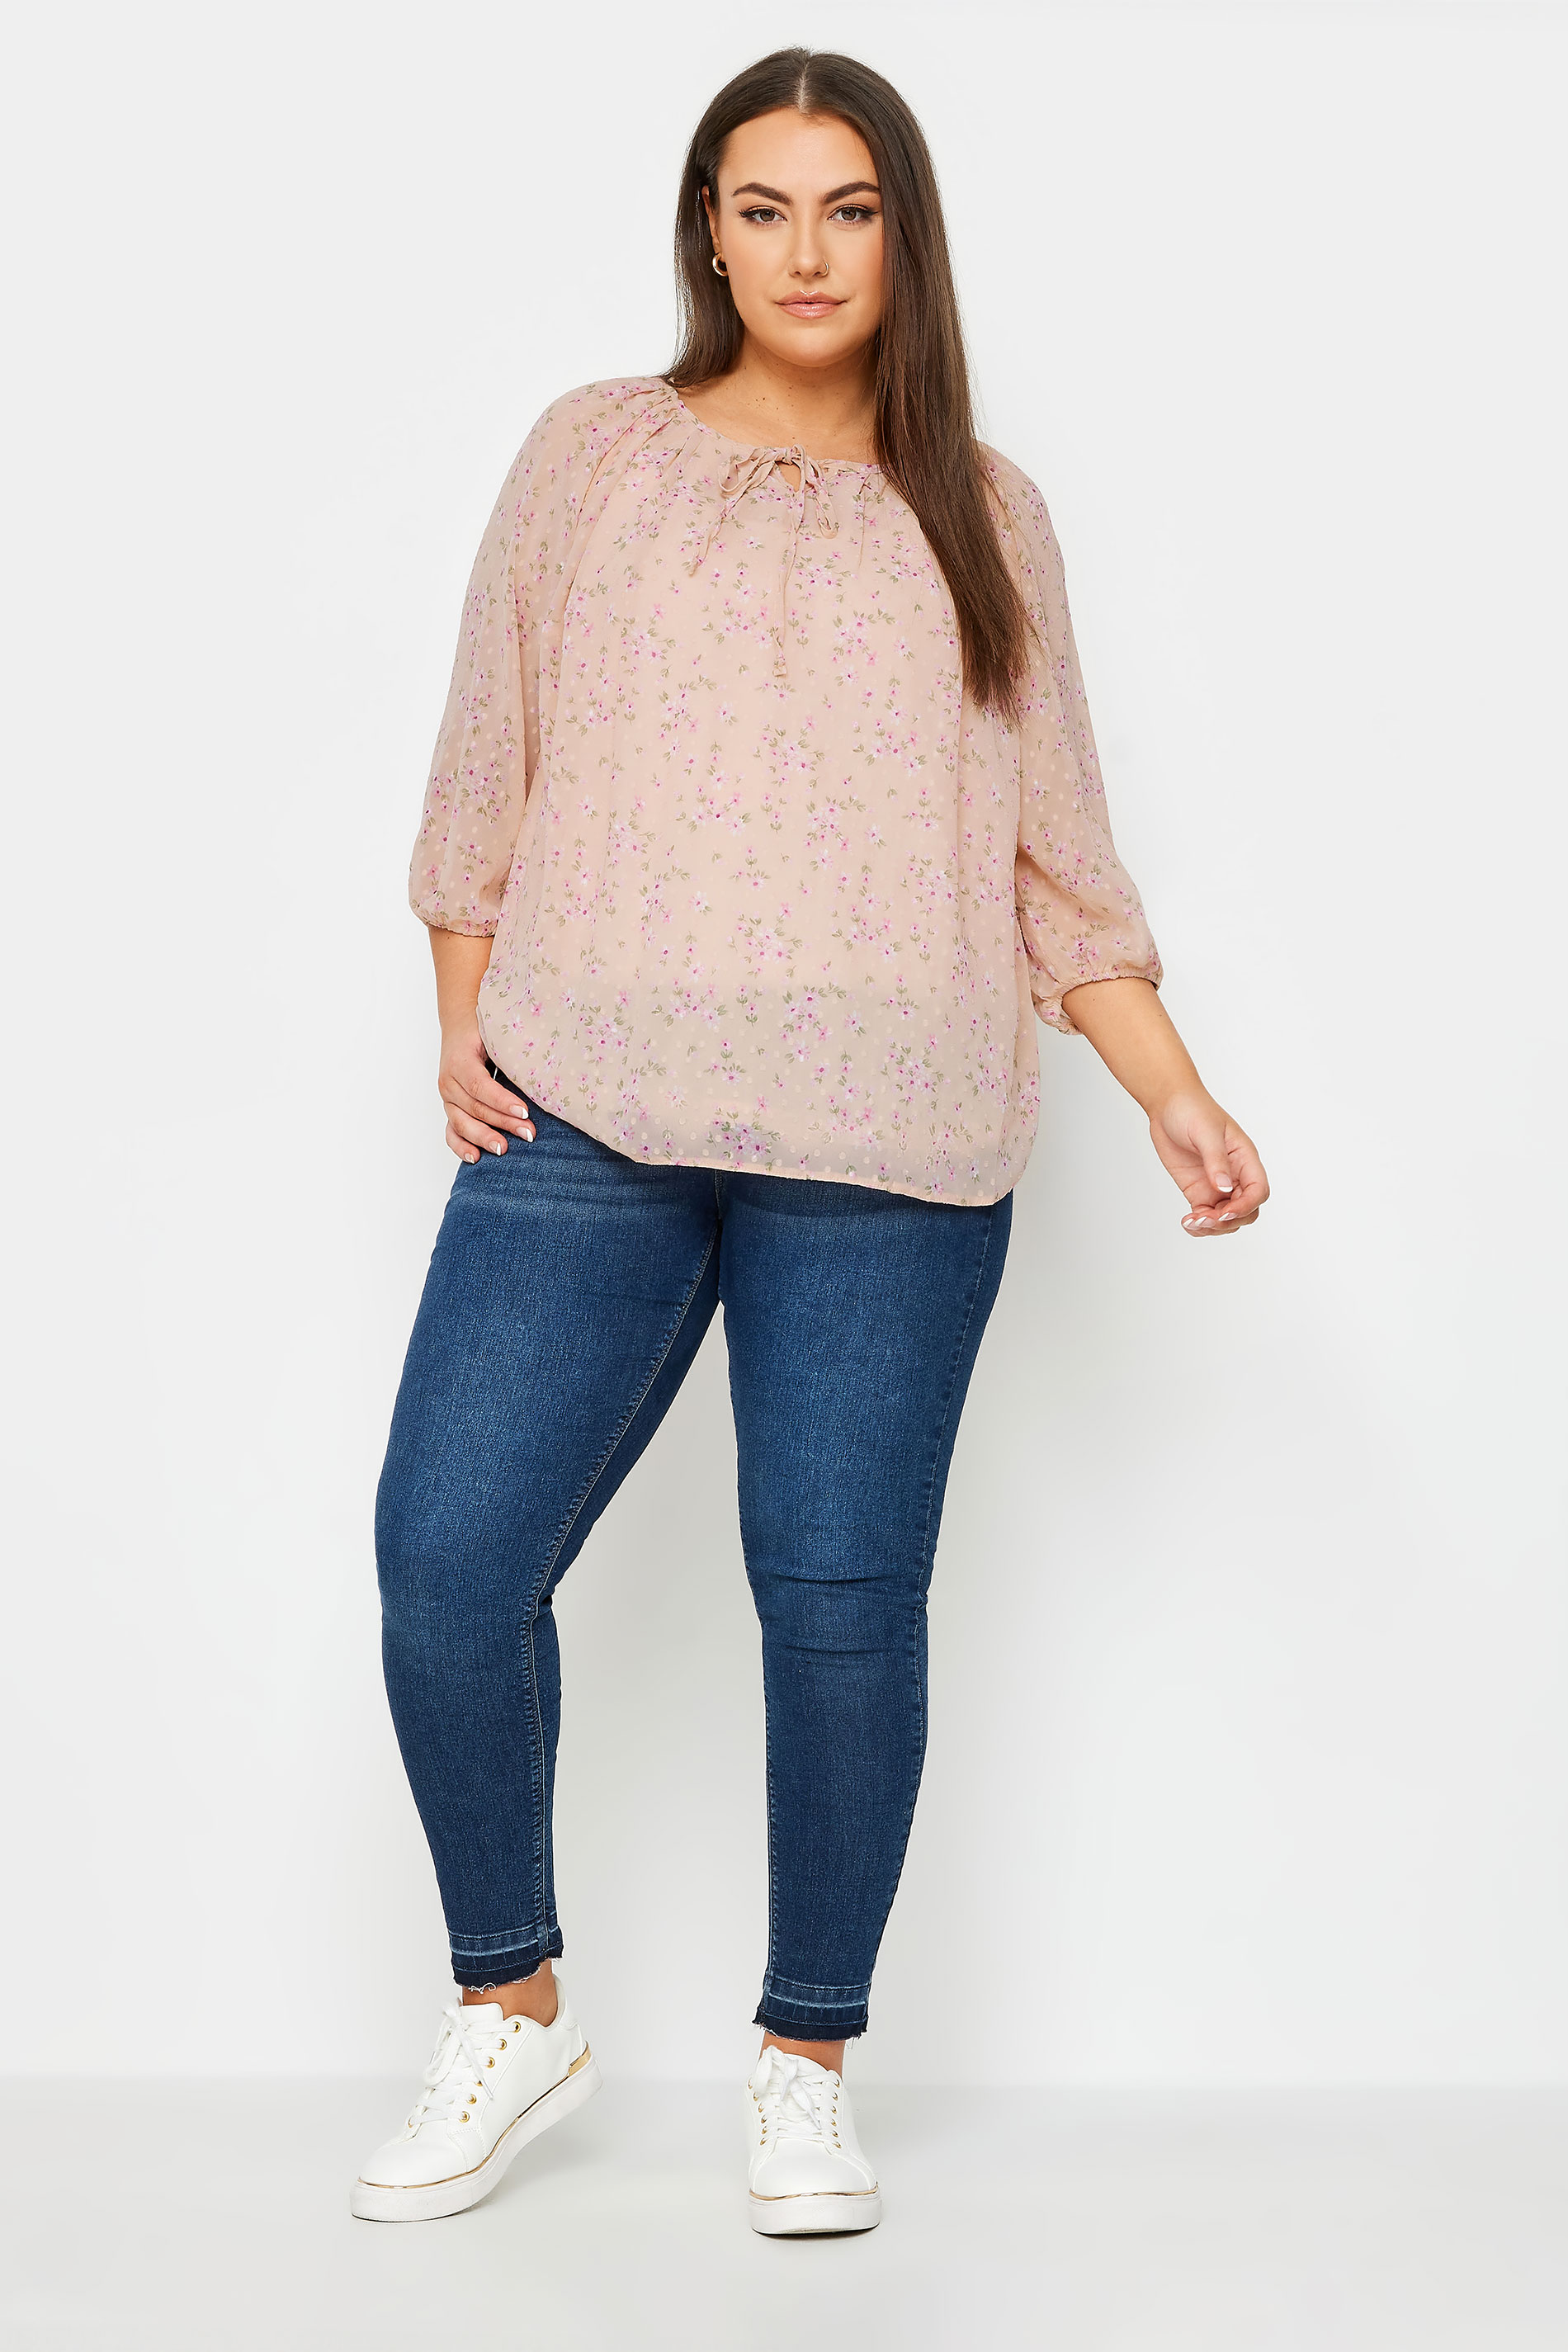 YOURS Plus Size Pink Floral Print Tie Neck Blouse | Yours Clothing 2